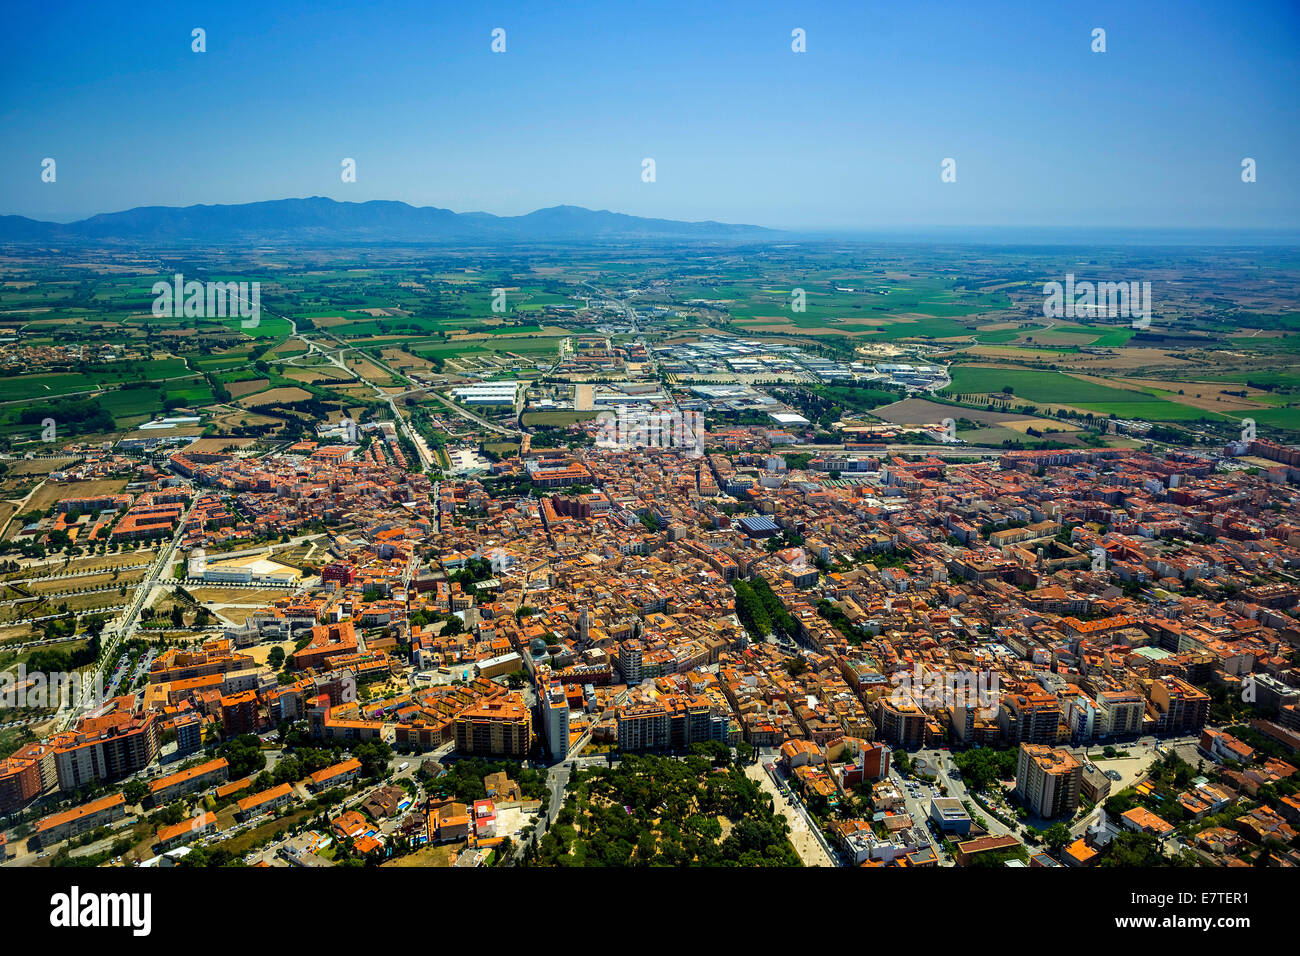 Aerial view, view of the city of Figueres or Figueras, Costa Brava, Catalonia, Spain Stock Photo